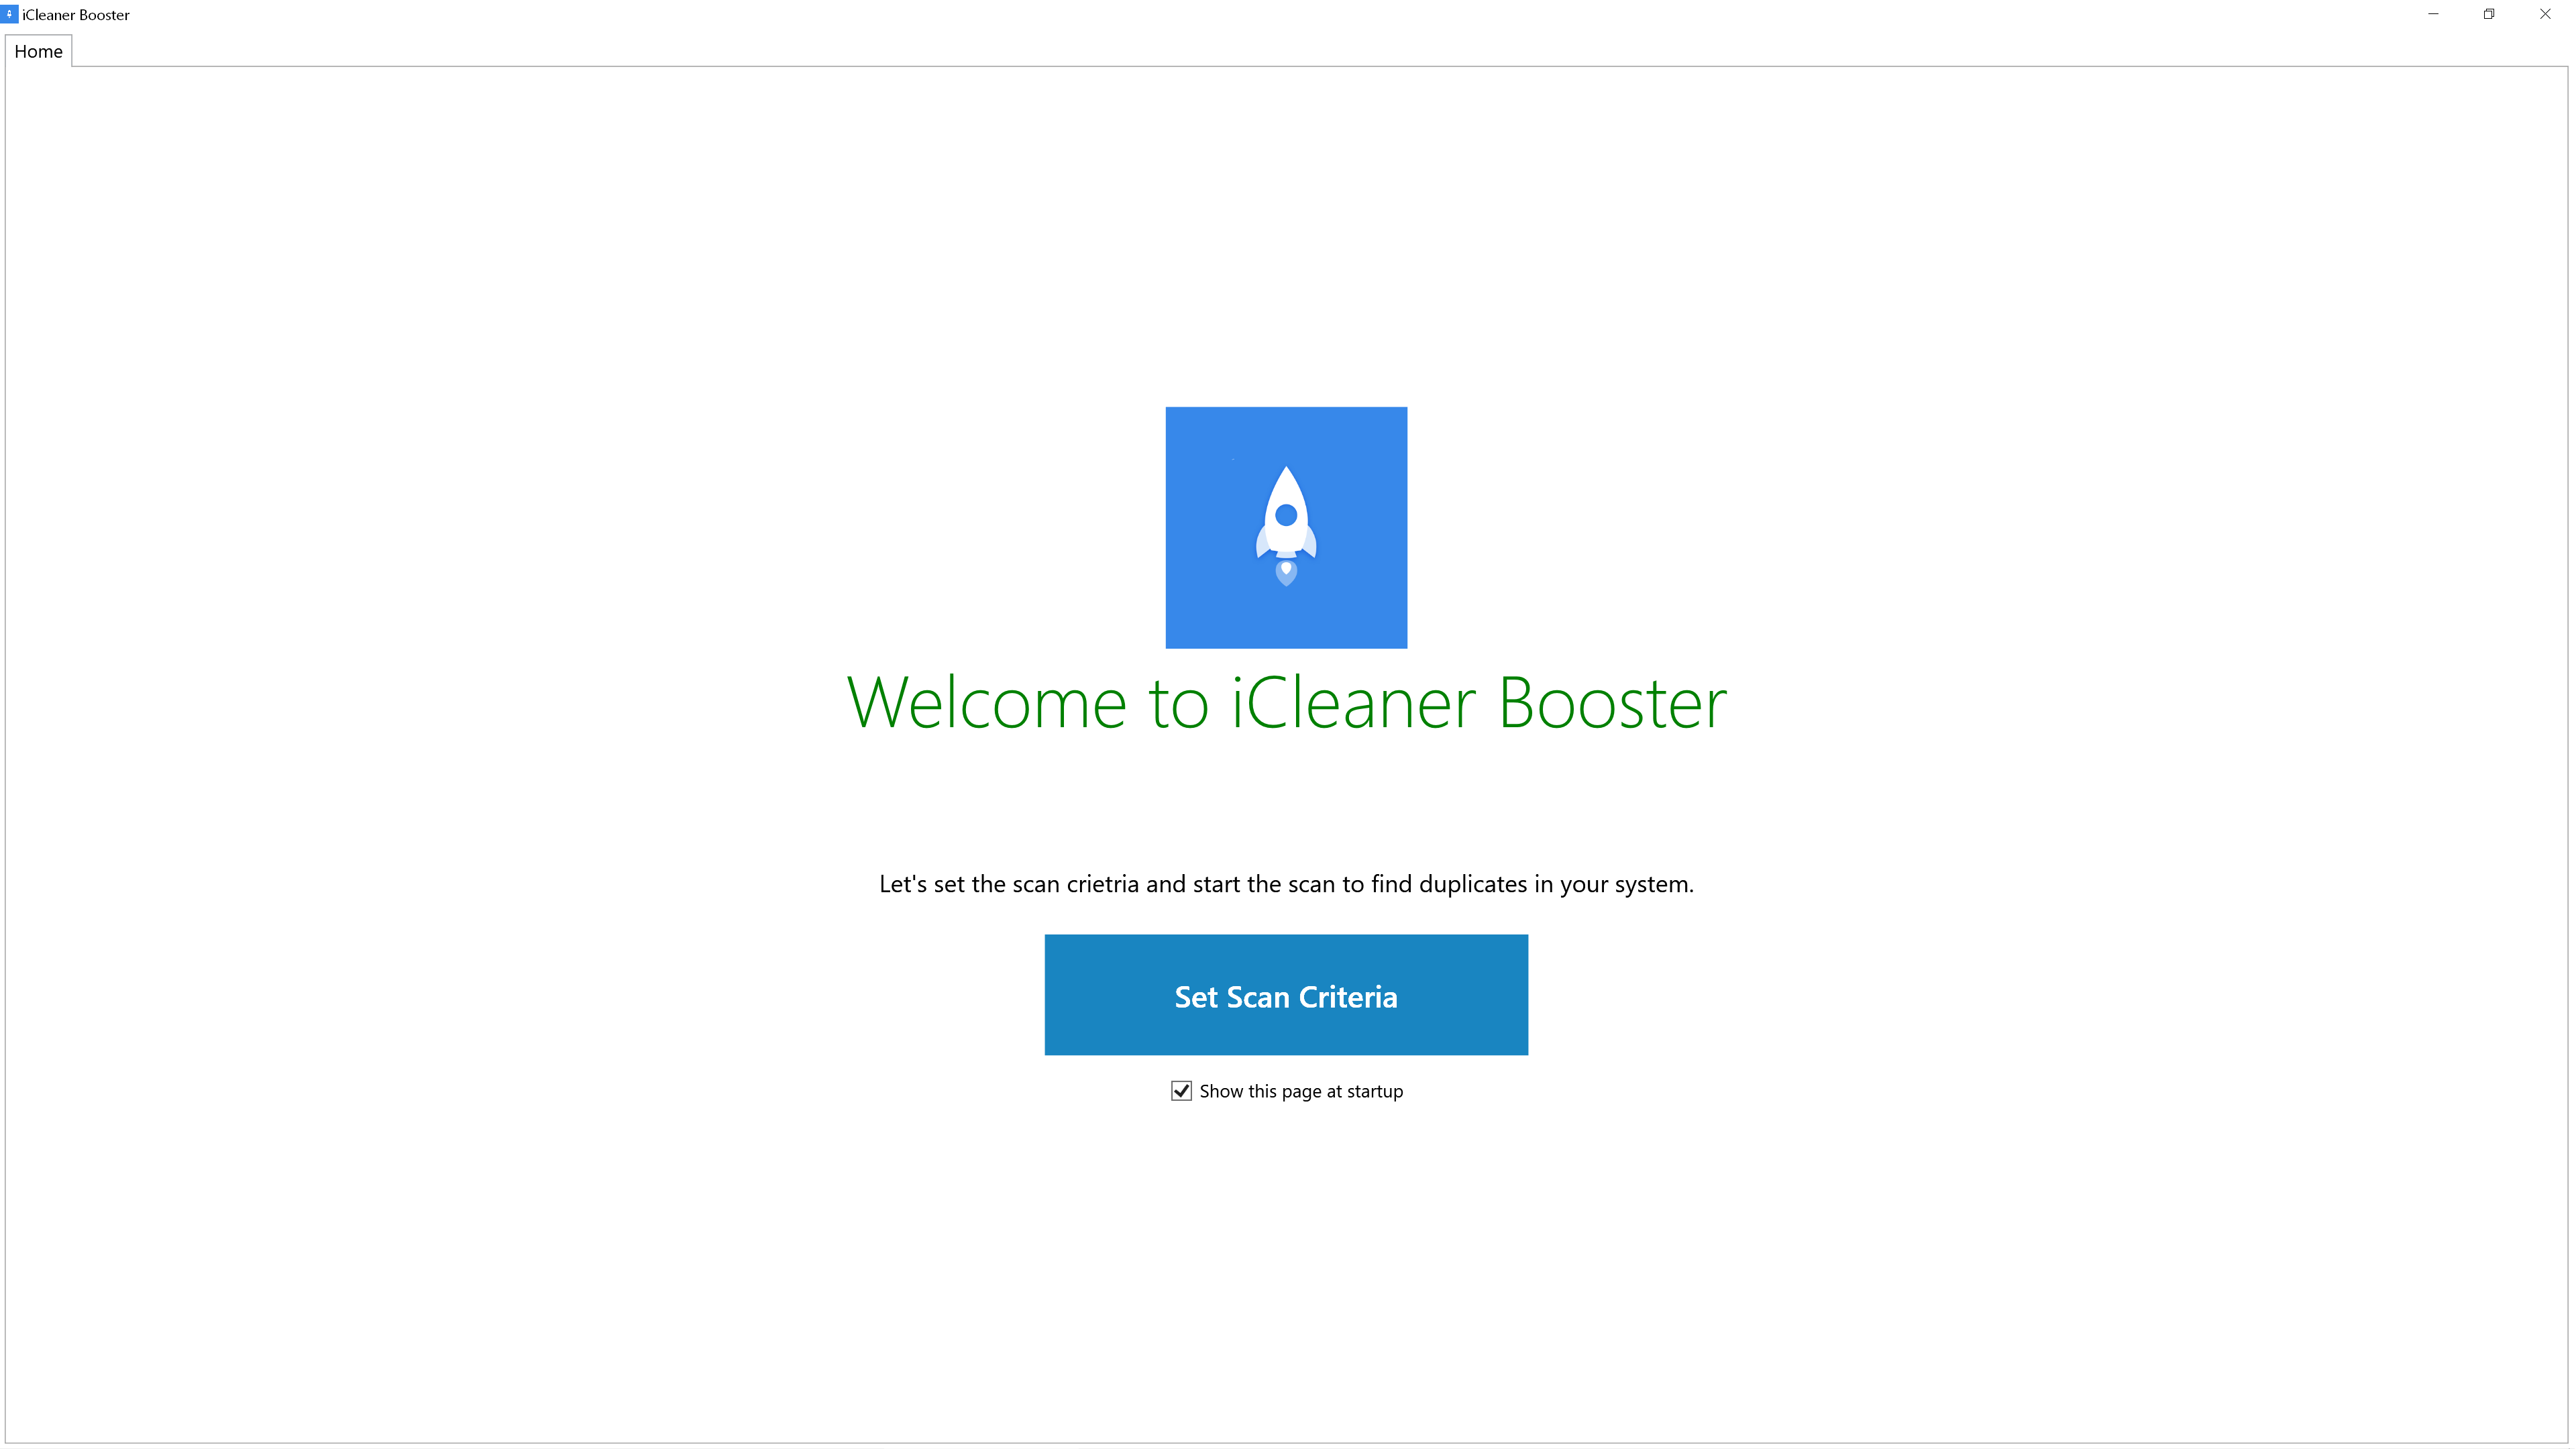 iCleaner Booster